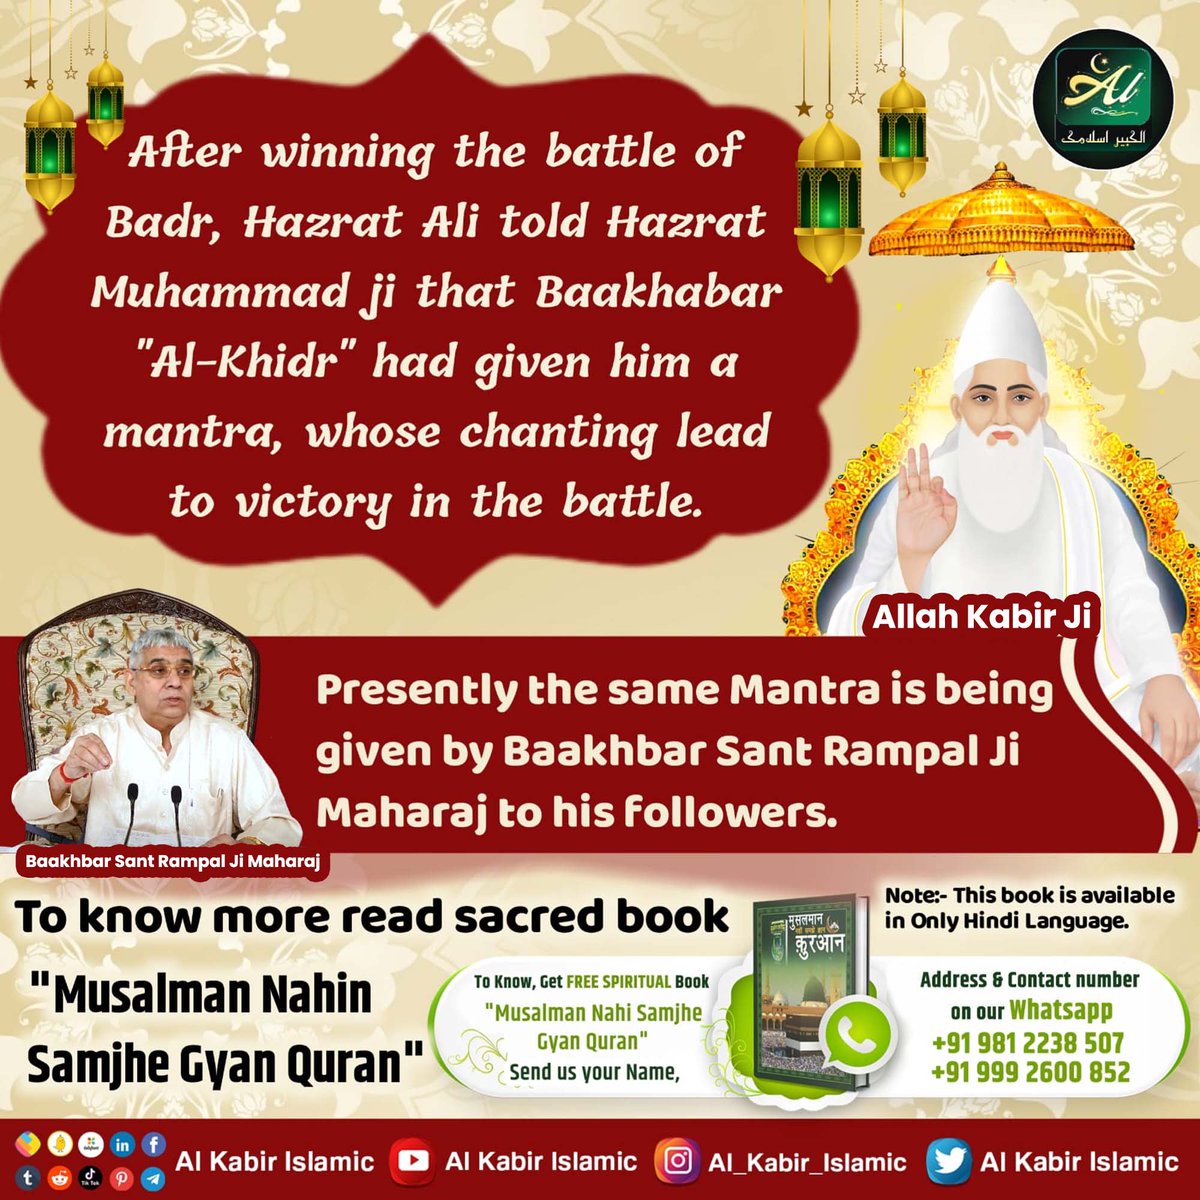 #अल्लाह_का_इल्म_बाखबर_से_पूछो After winning the battle of Badr, Hazrat Ali told Hazrat Muhammad ji that Baakhabar 'Al-Khidr' had given him a mantra, whose chanting lead to victory in the battle. Presently the same mantra is being given by Baakhabar Sant Rampal Ji to his followers